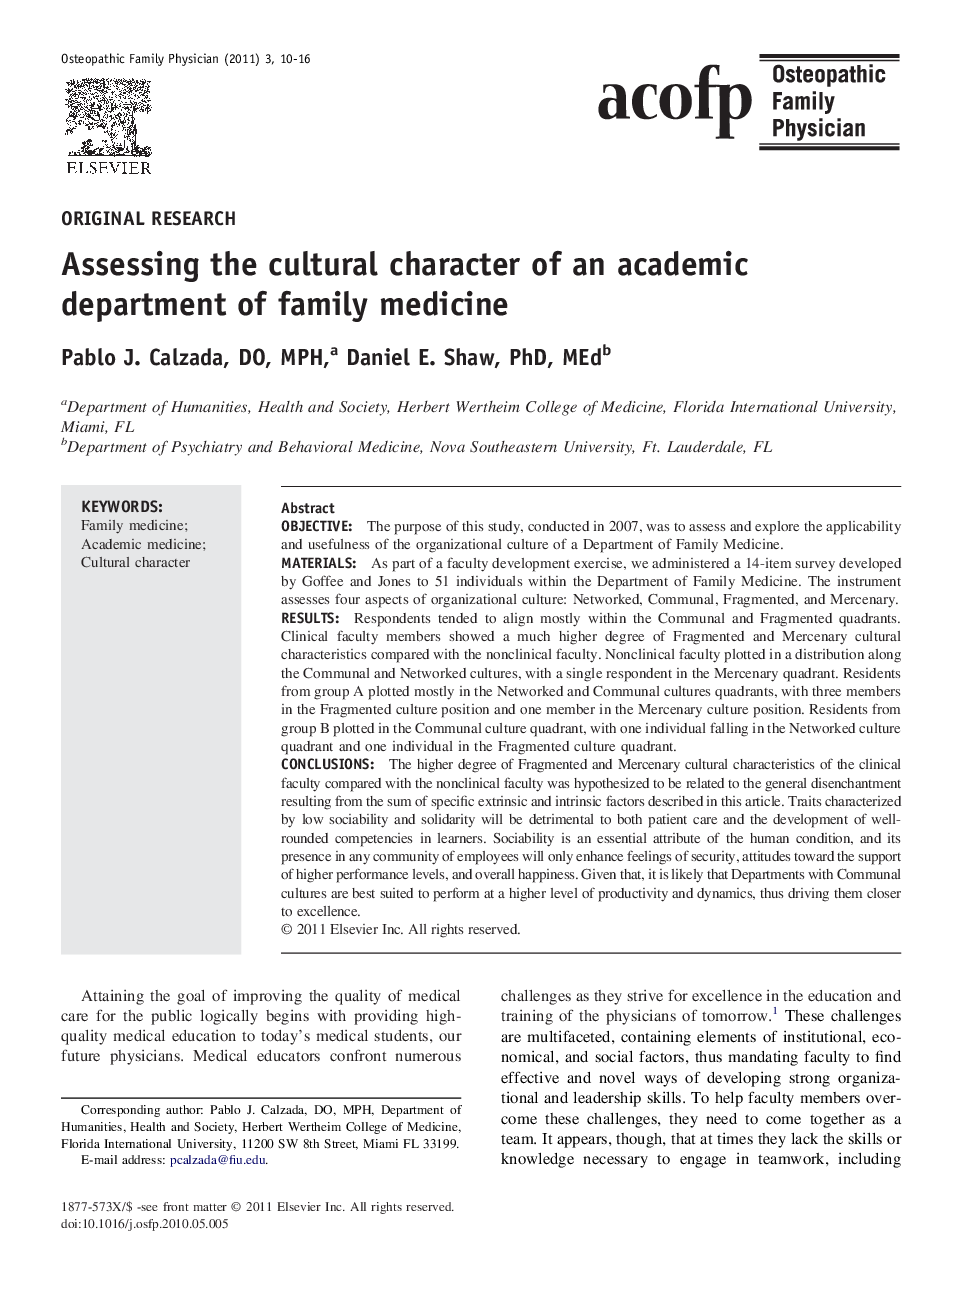 Assessing the cultural character of an academic department of family medicine